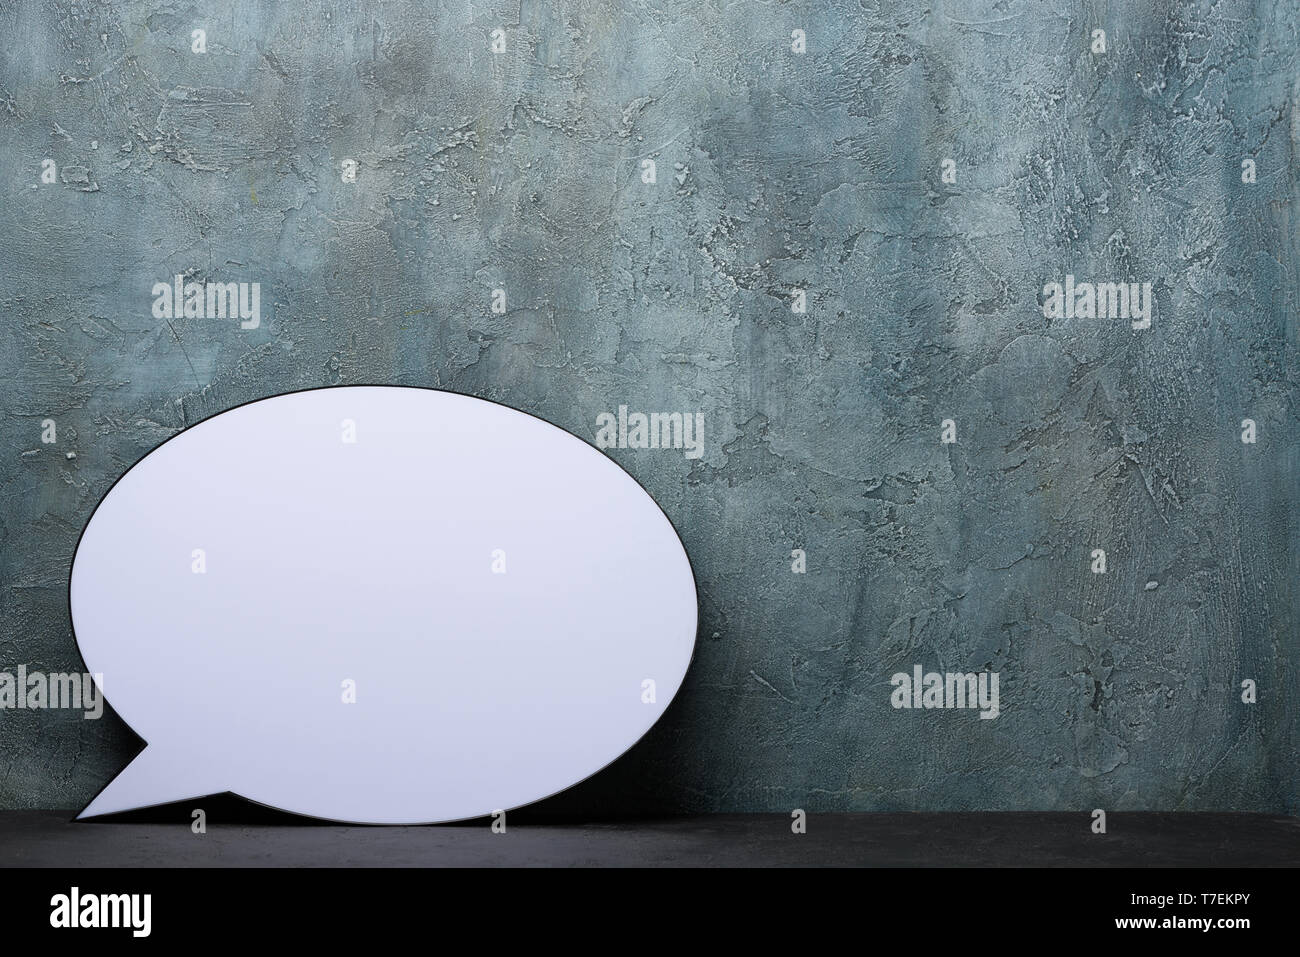 Speech Bubble lightbox on desk. Plastic light box in form of chat message icon with rustic background and copy space. Stock Photo